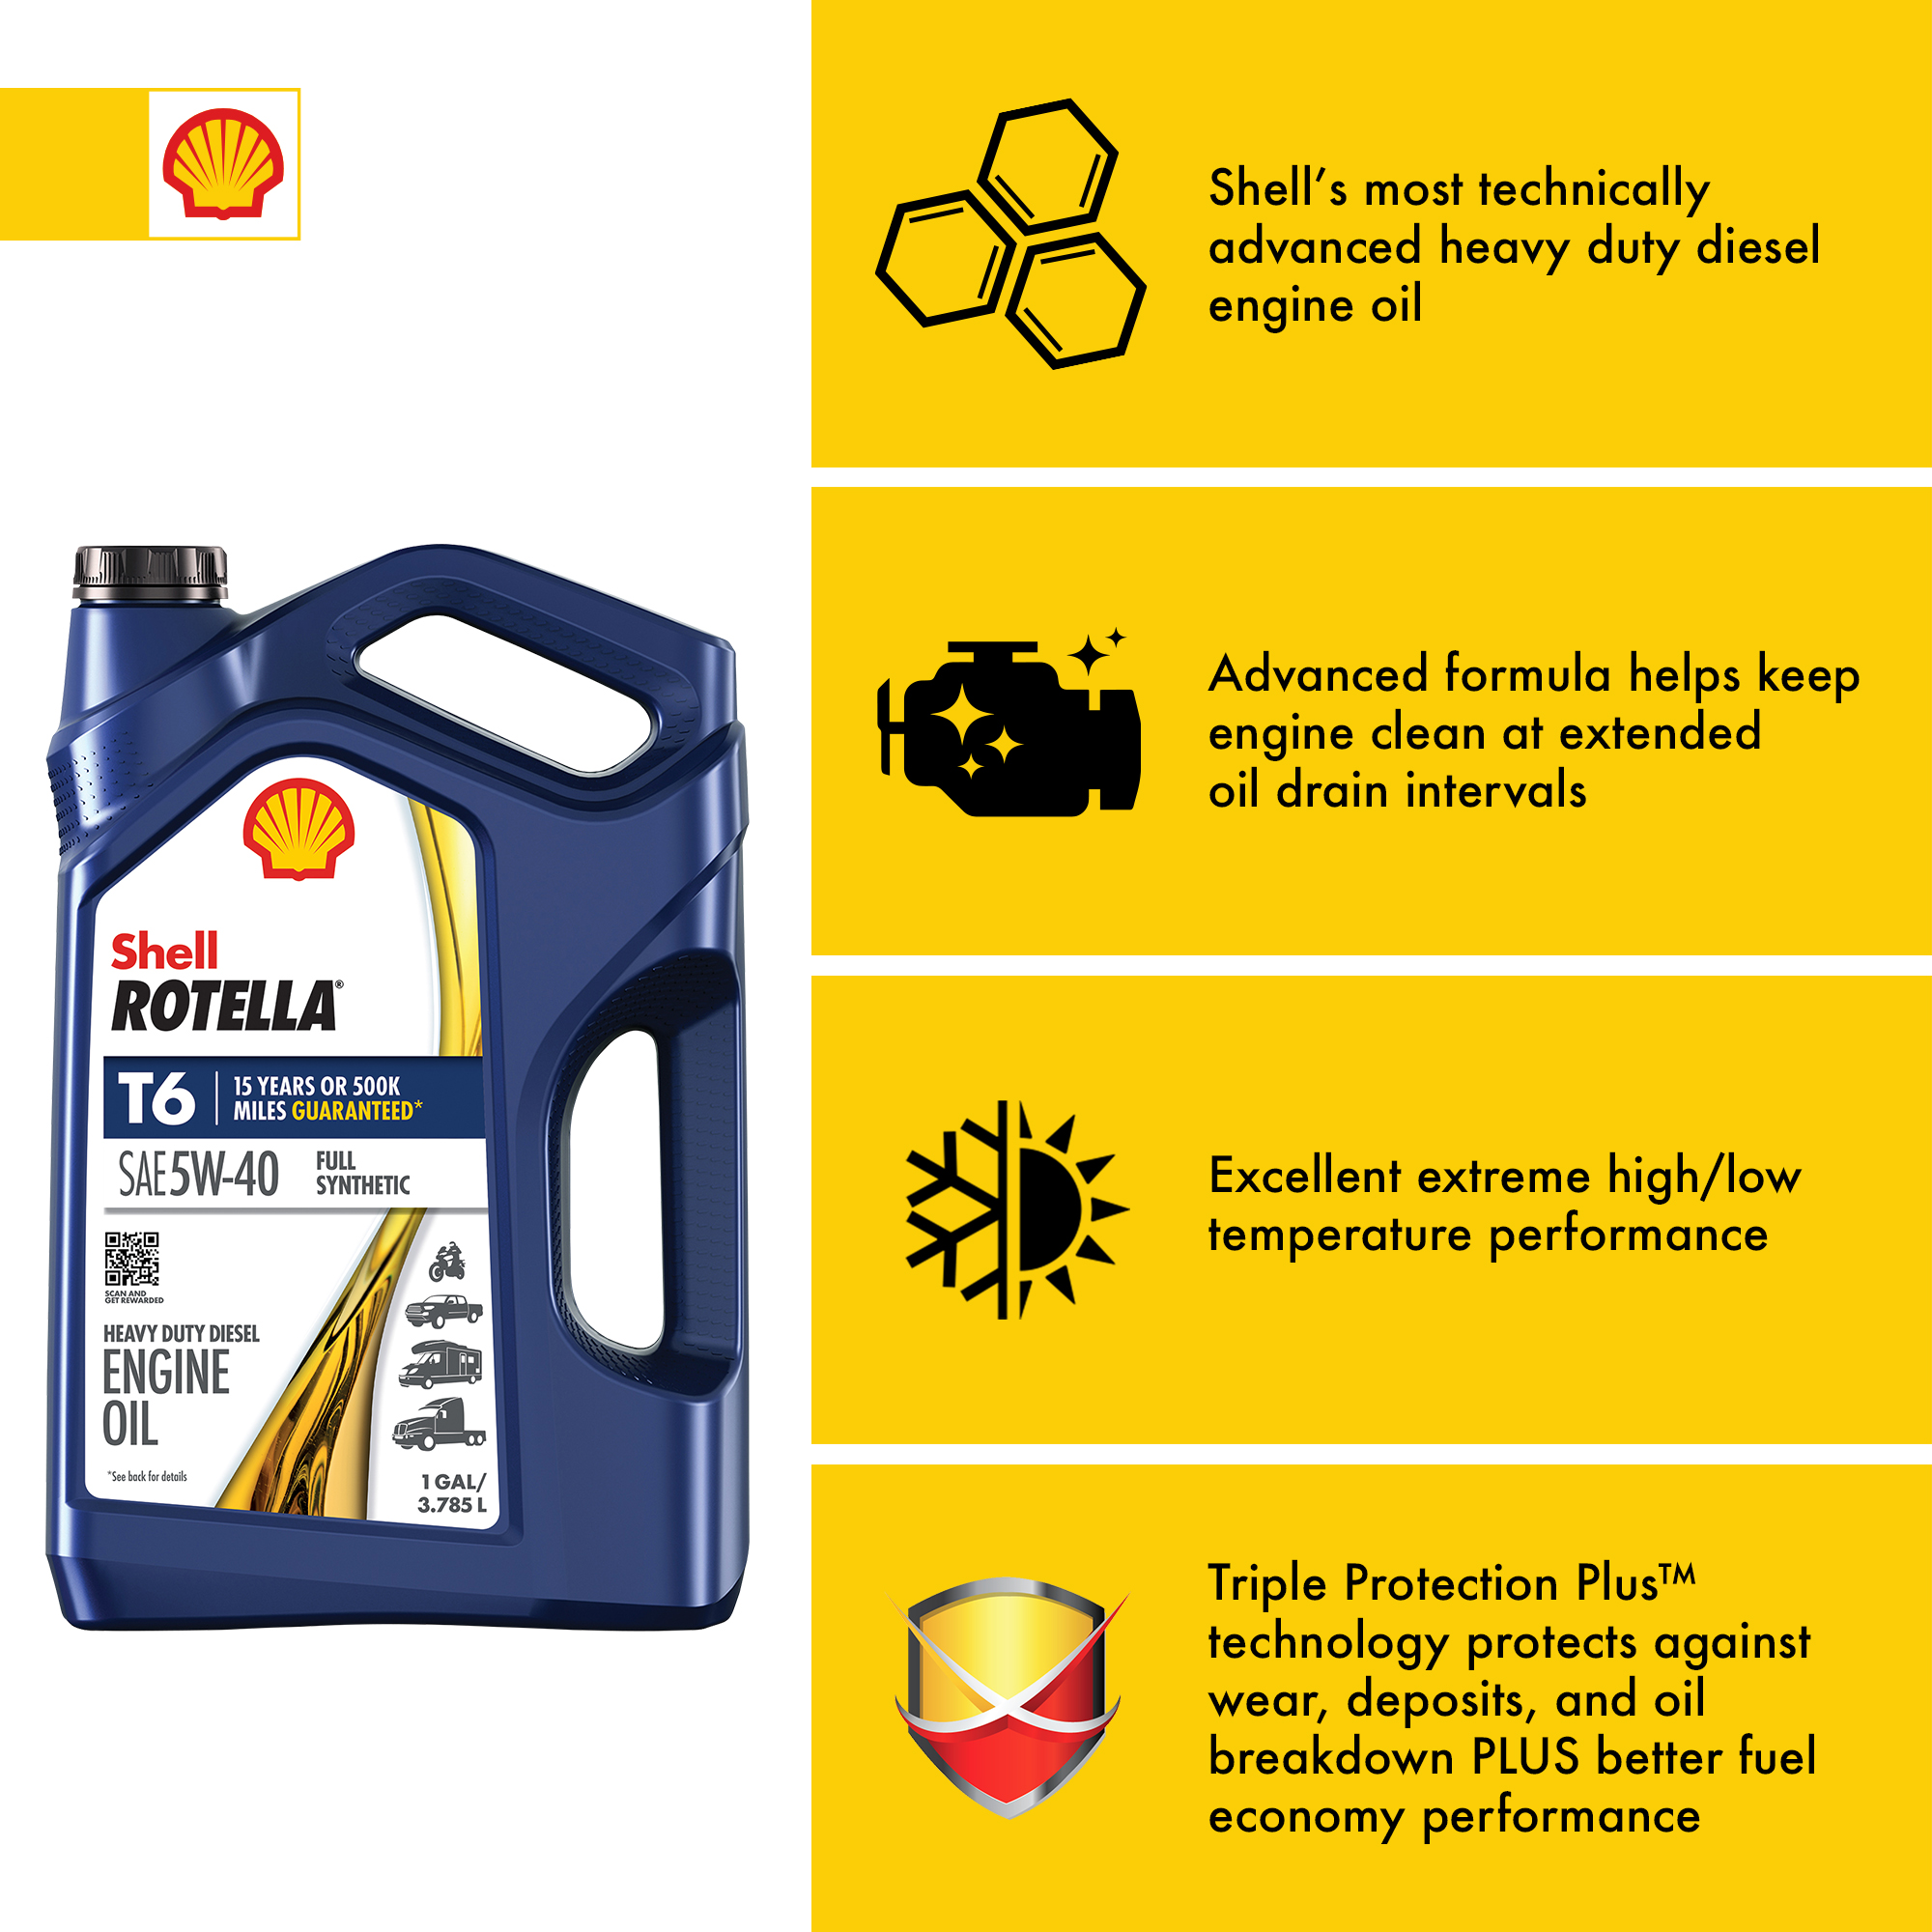 Shell Rotella T6 Full Synthetic 5W-40 Diesel Engine Oil, 1 Gallon - image 3 of 9